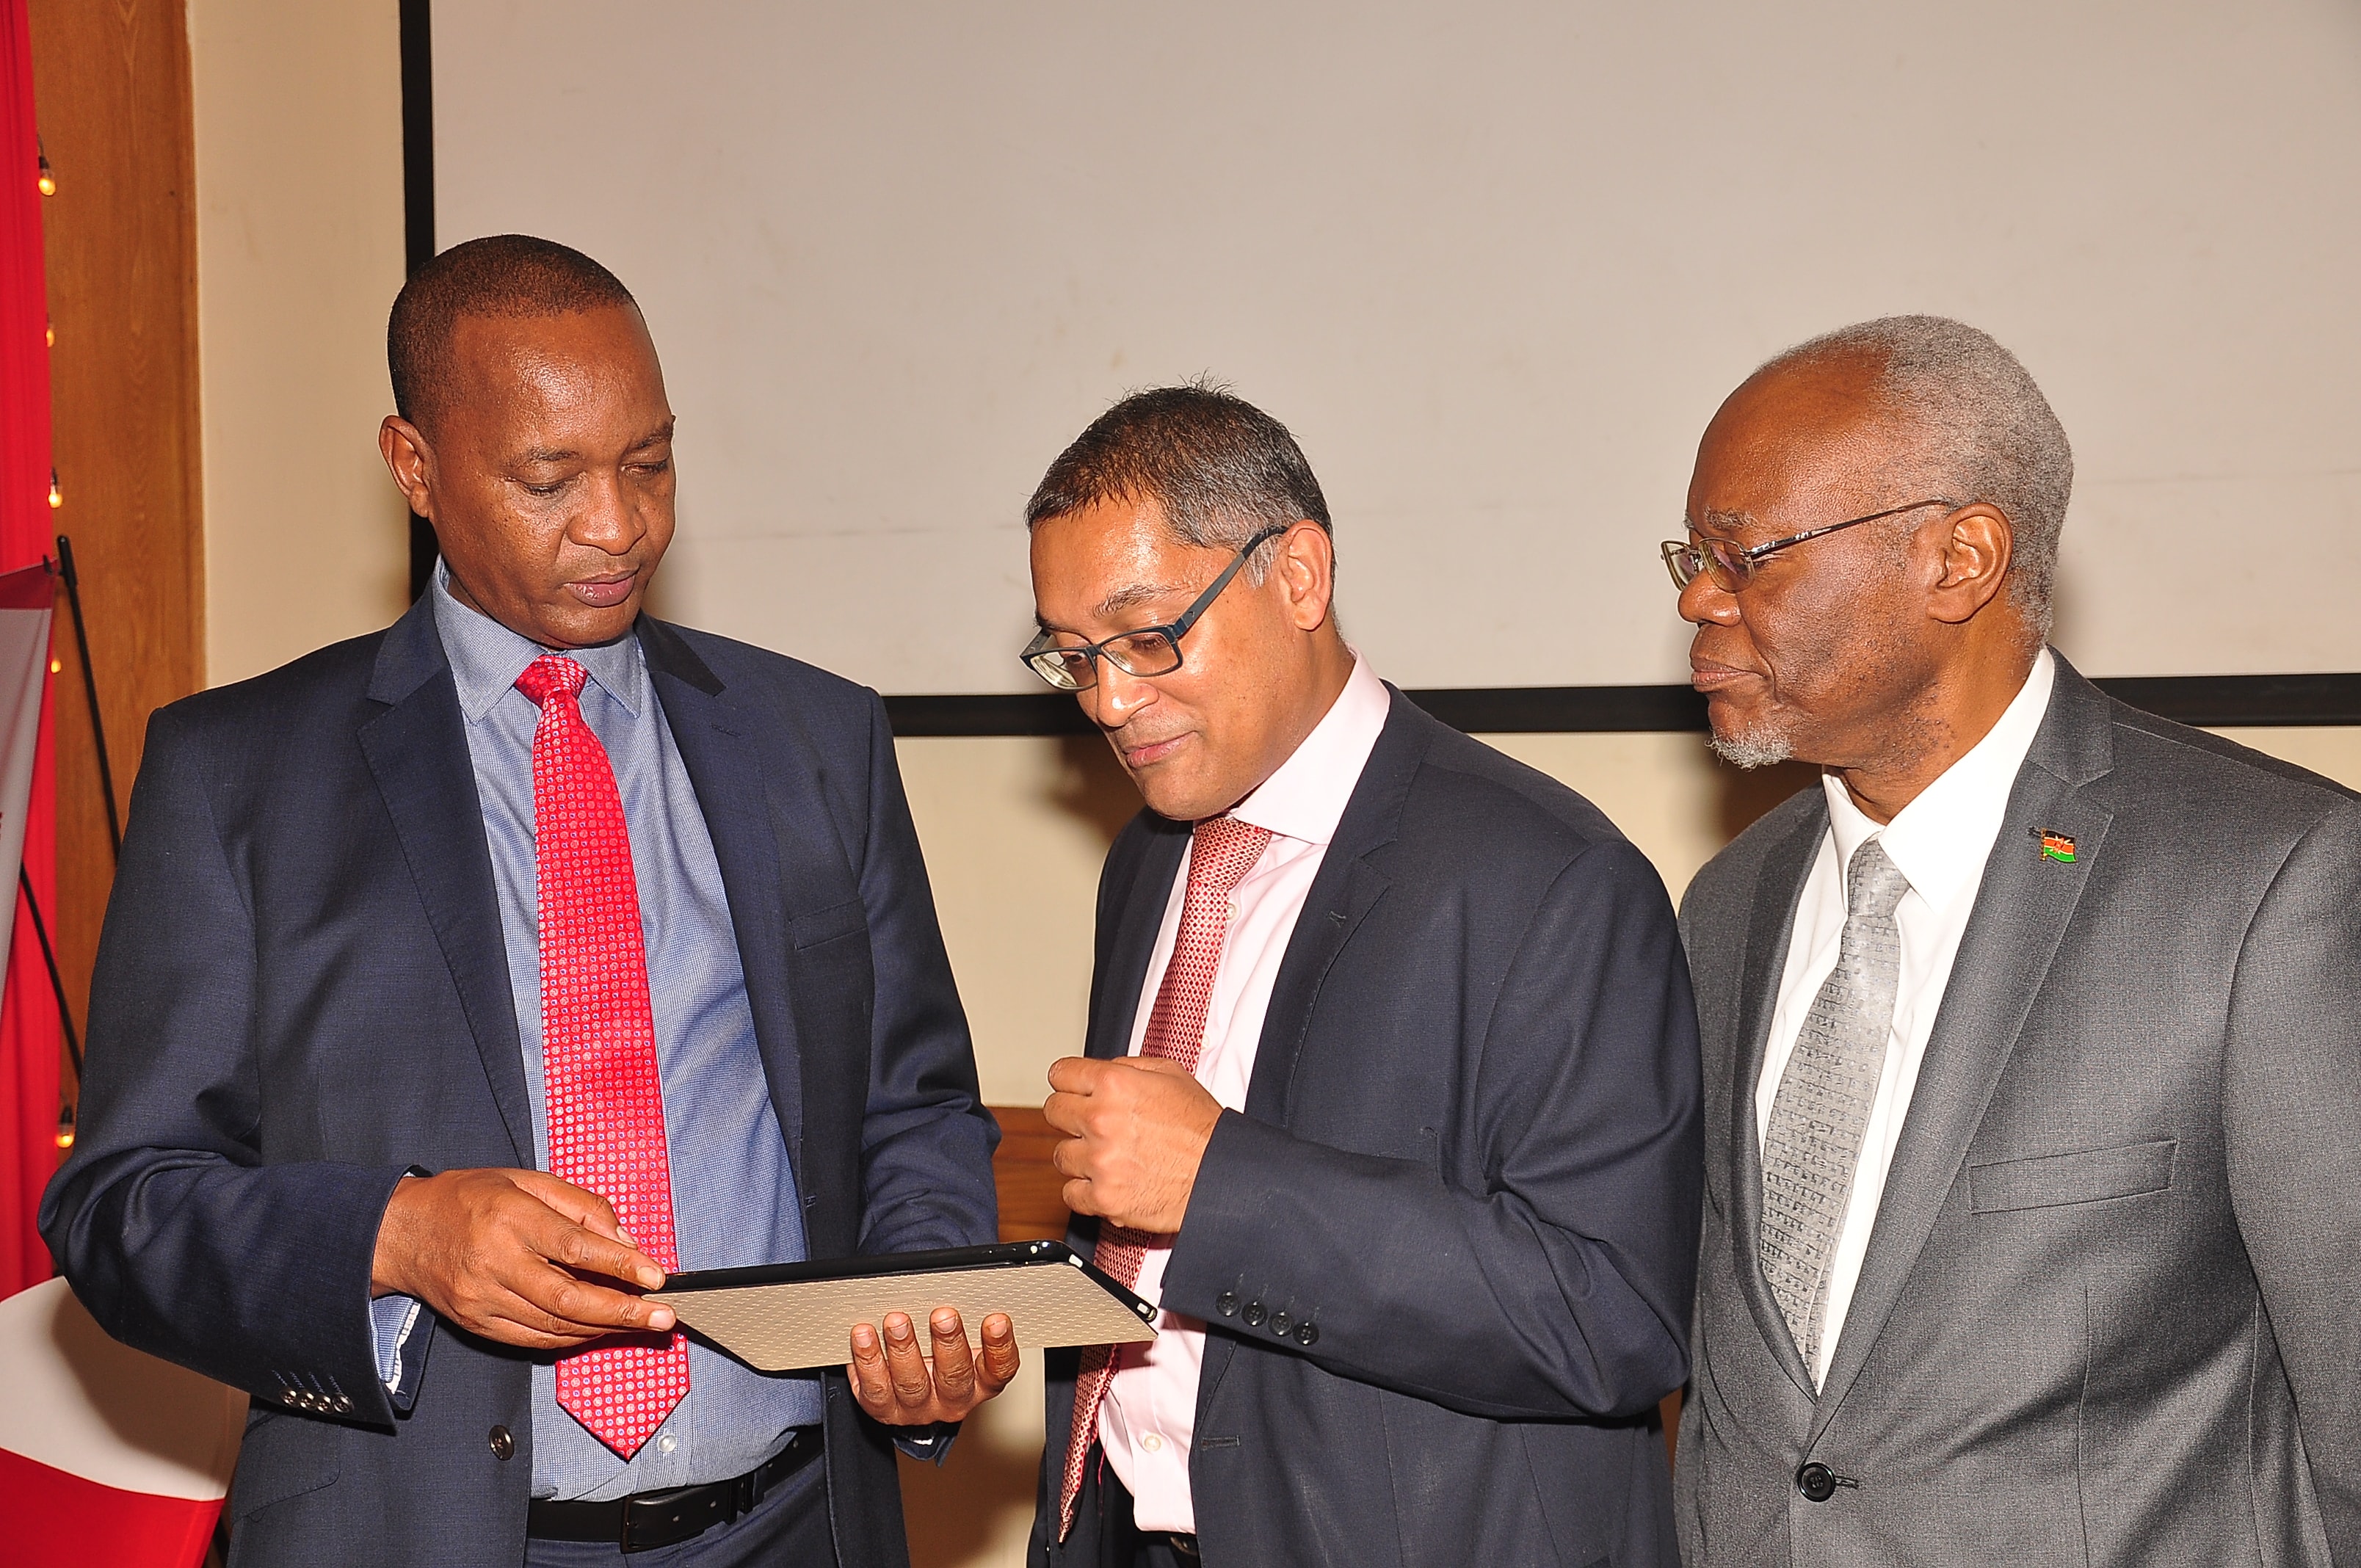 Kenya Re Managing Director Mr. Jadiah Mwarania (L), Dry Associates Investment Bank GM, Mr. Ewart Salins (C)  and Kenya Re Chairman Mr. Chiboli Shakaba (R) discuss some figures during the Kenya Re Half Year Investor briefing held at the Intercontinental Hotel on the 2nd of August 2019.